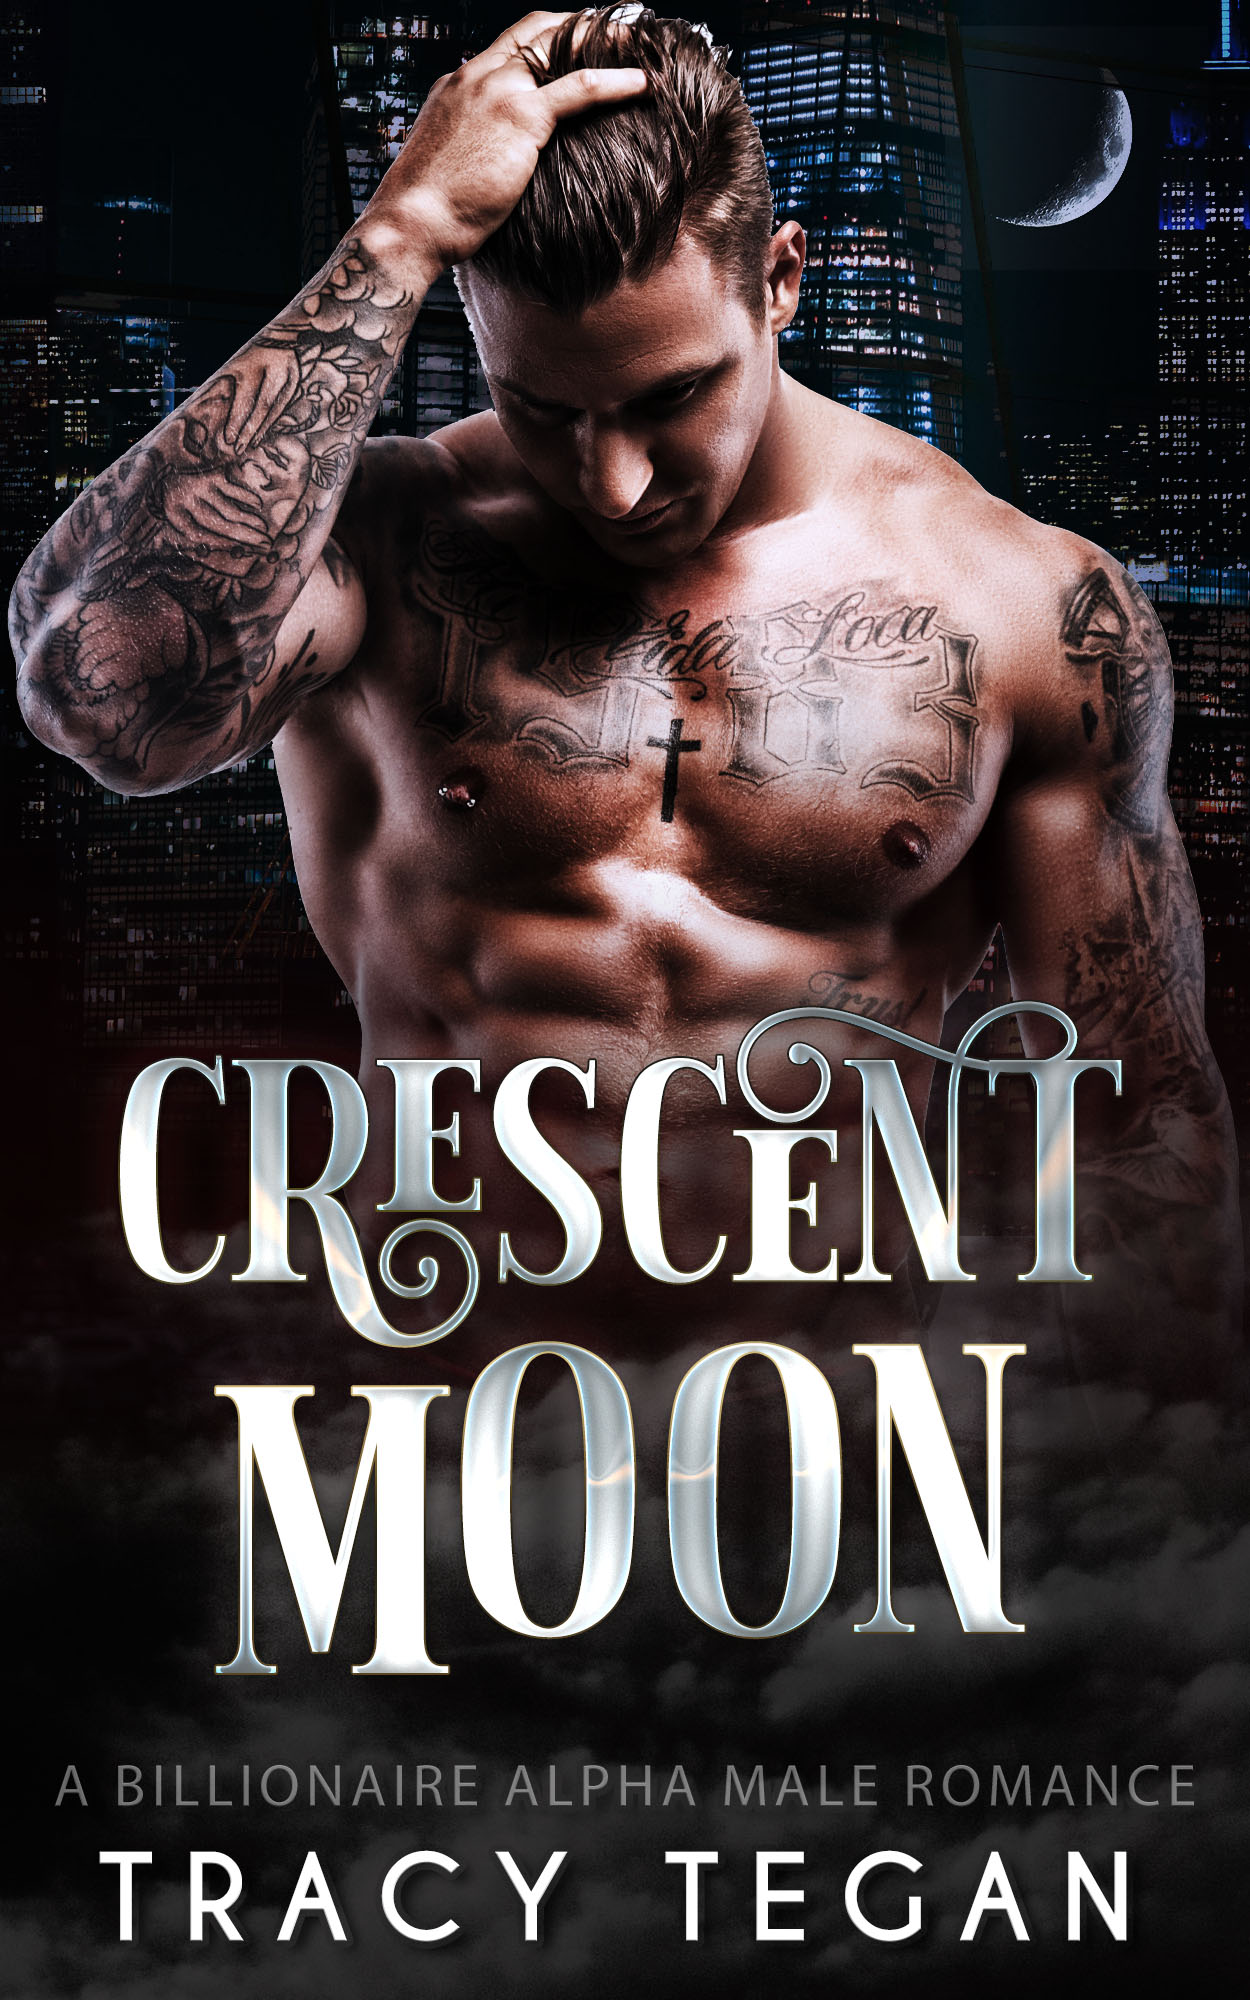 Crescent Moon by Tracy Tegan